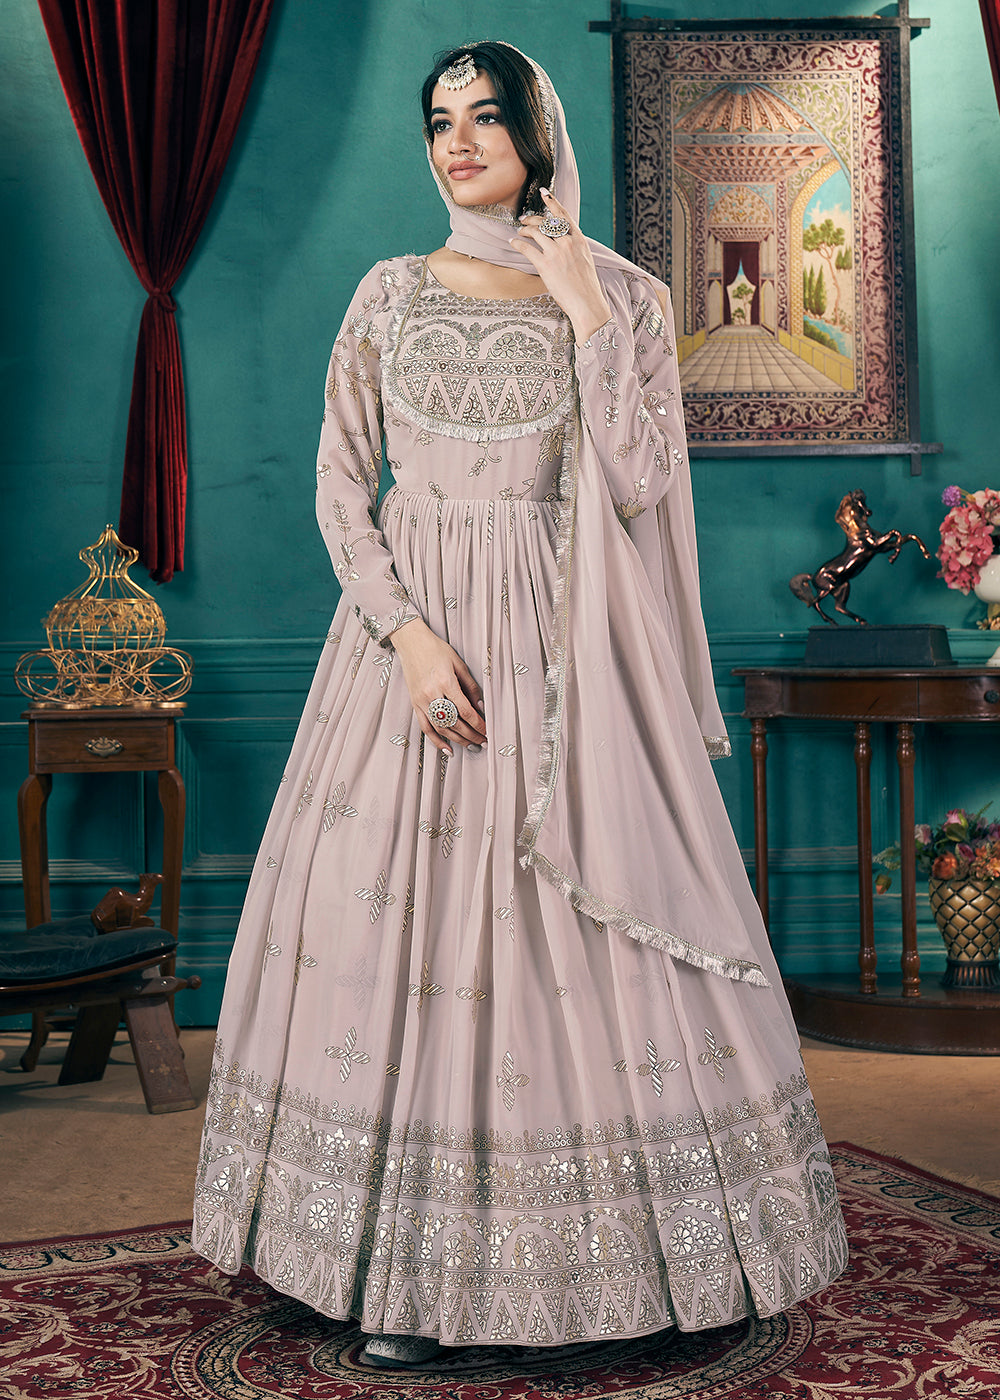 Buy Now Metalic Foil Work Embroidered Wedding Festive Beige Anarkali Gown Online in USA, UK, Australia, Canada & Worldwide at Empress Clothing.